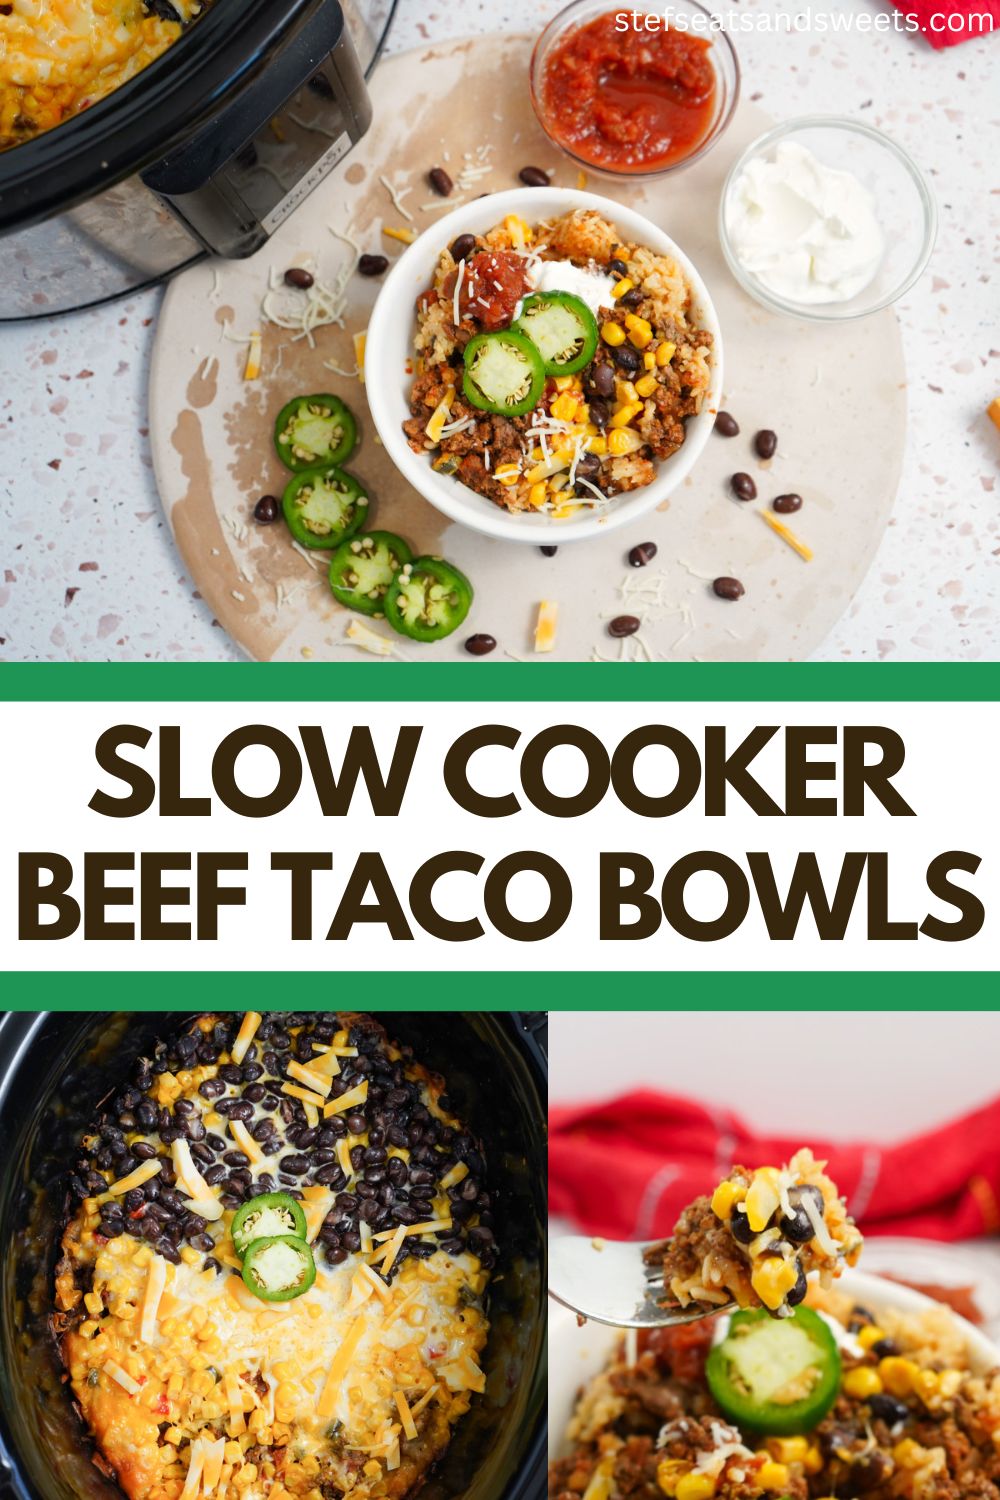 Slow cooker beef taco bowls 